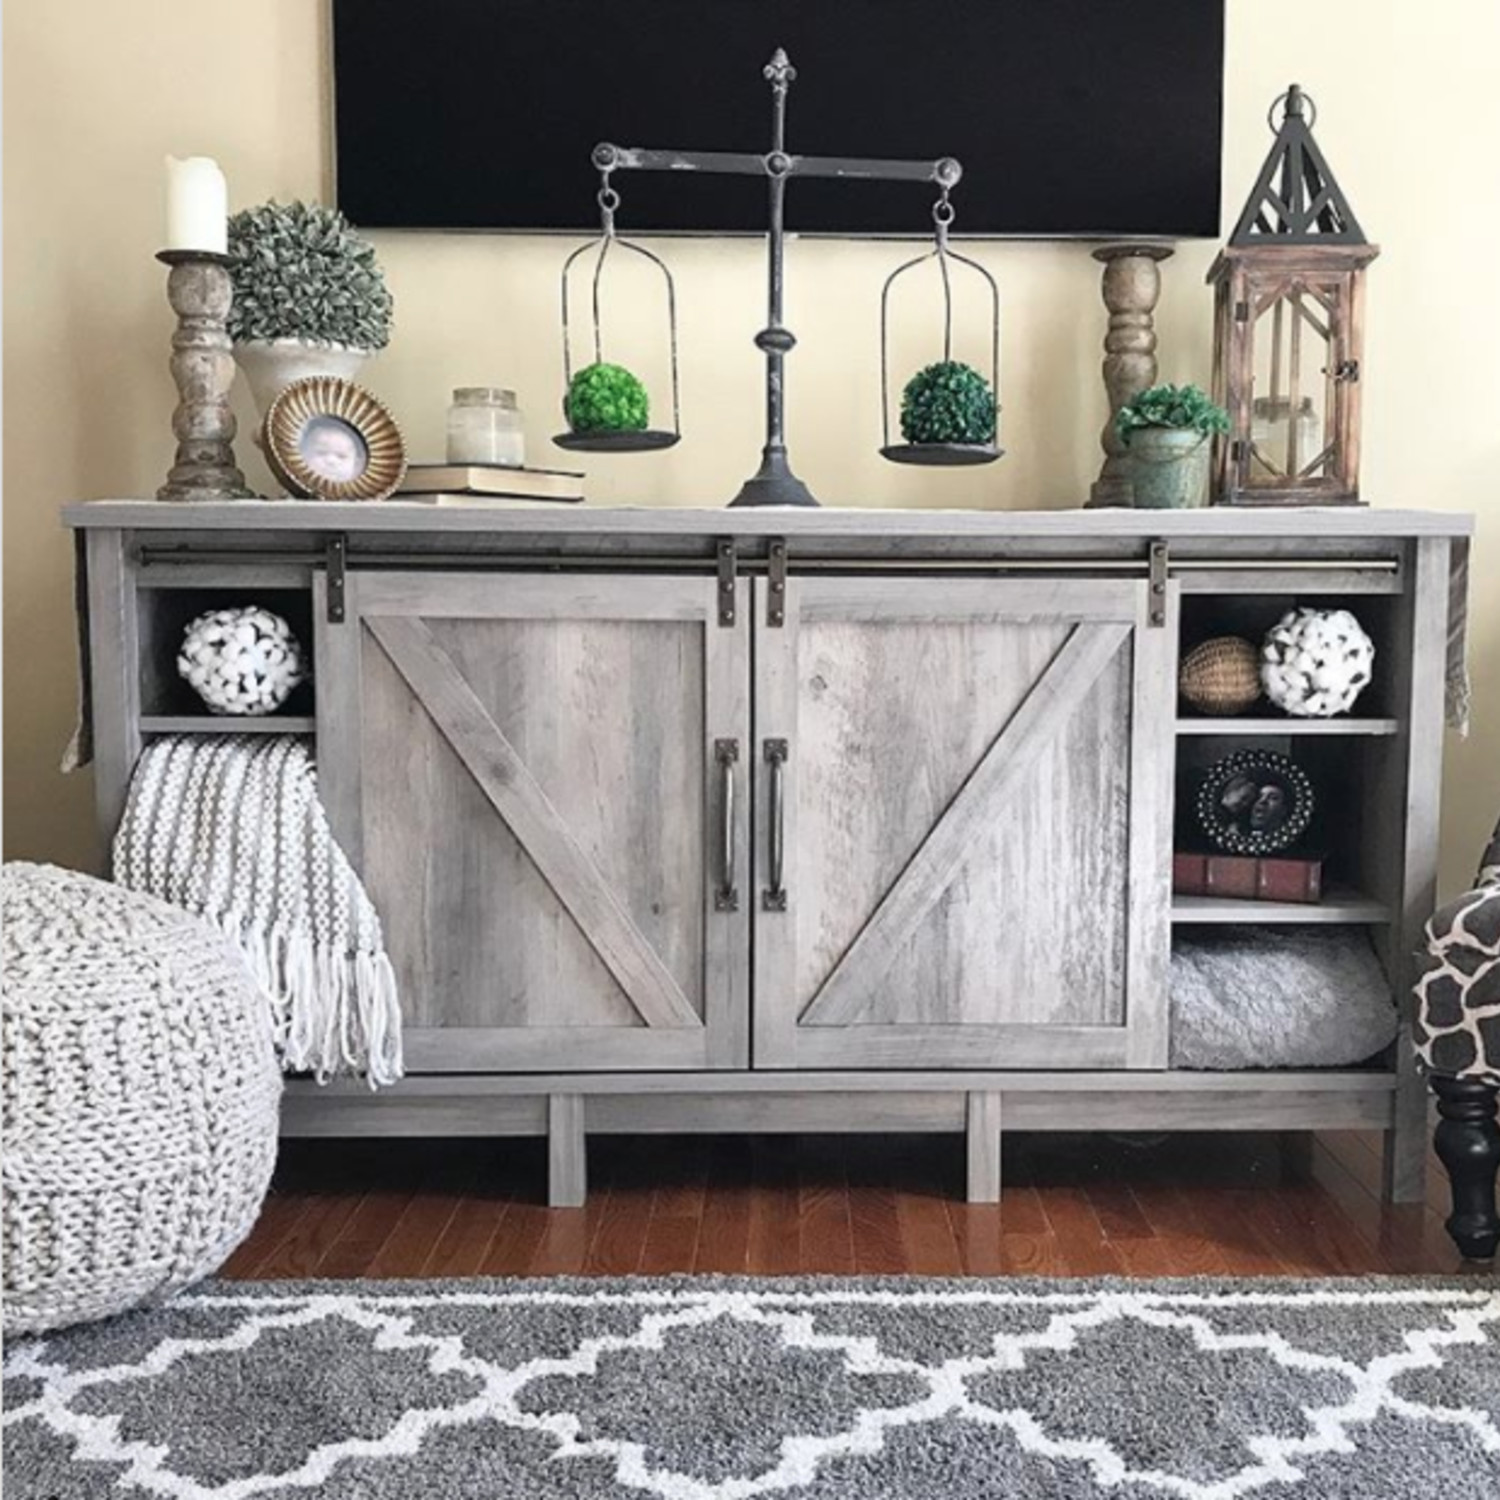 Stunning farmhouse rustic living room idea - love this rustic cabinet for the living room